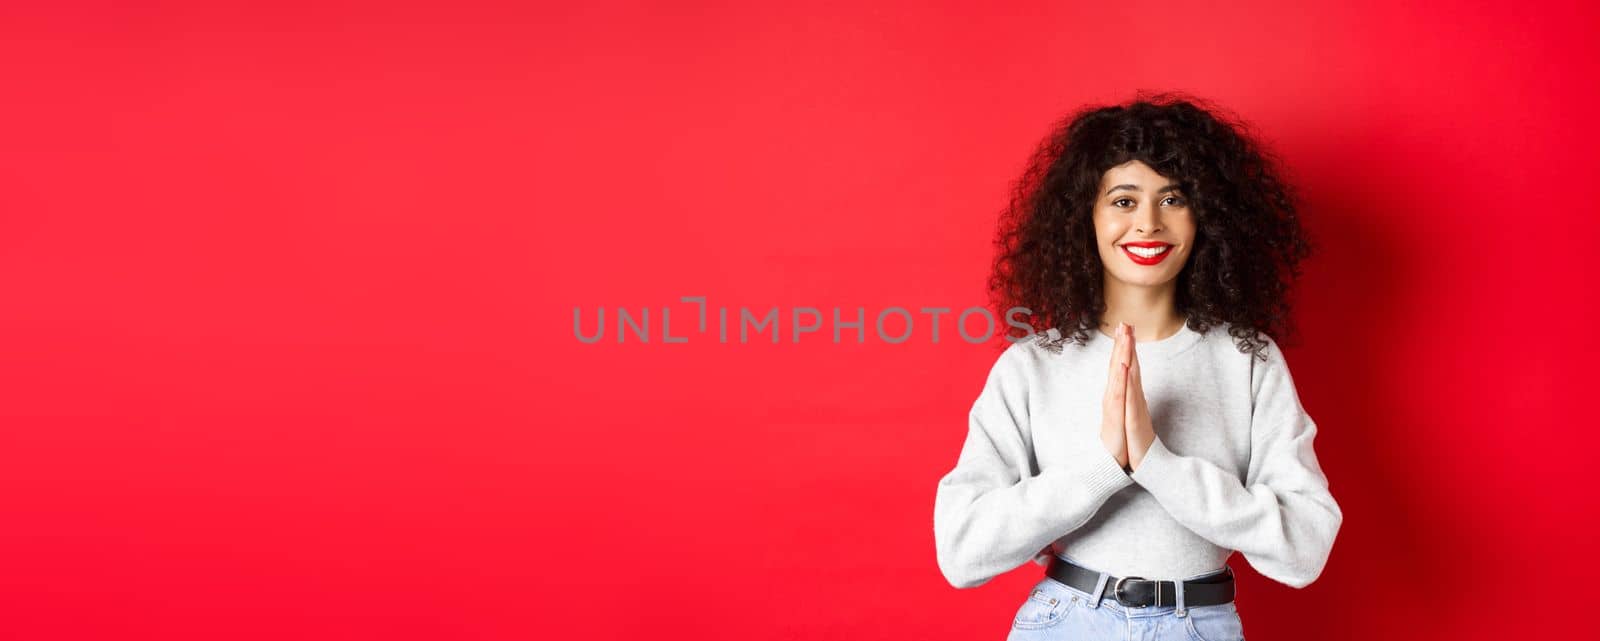 Beautiful smiling italian woman saying thank you, holding hands in namaste gesture and looking at camera grateful, standing on red background.